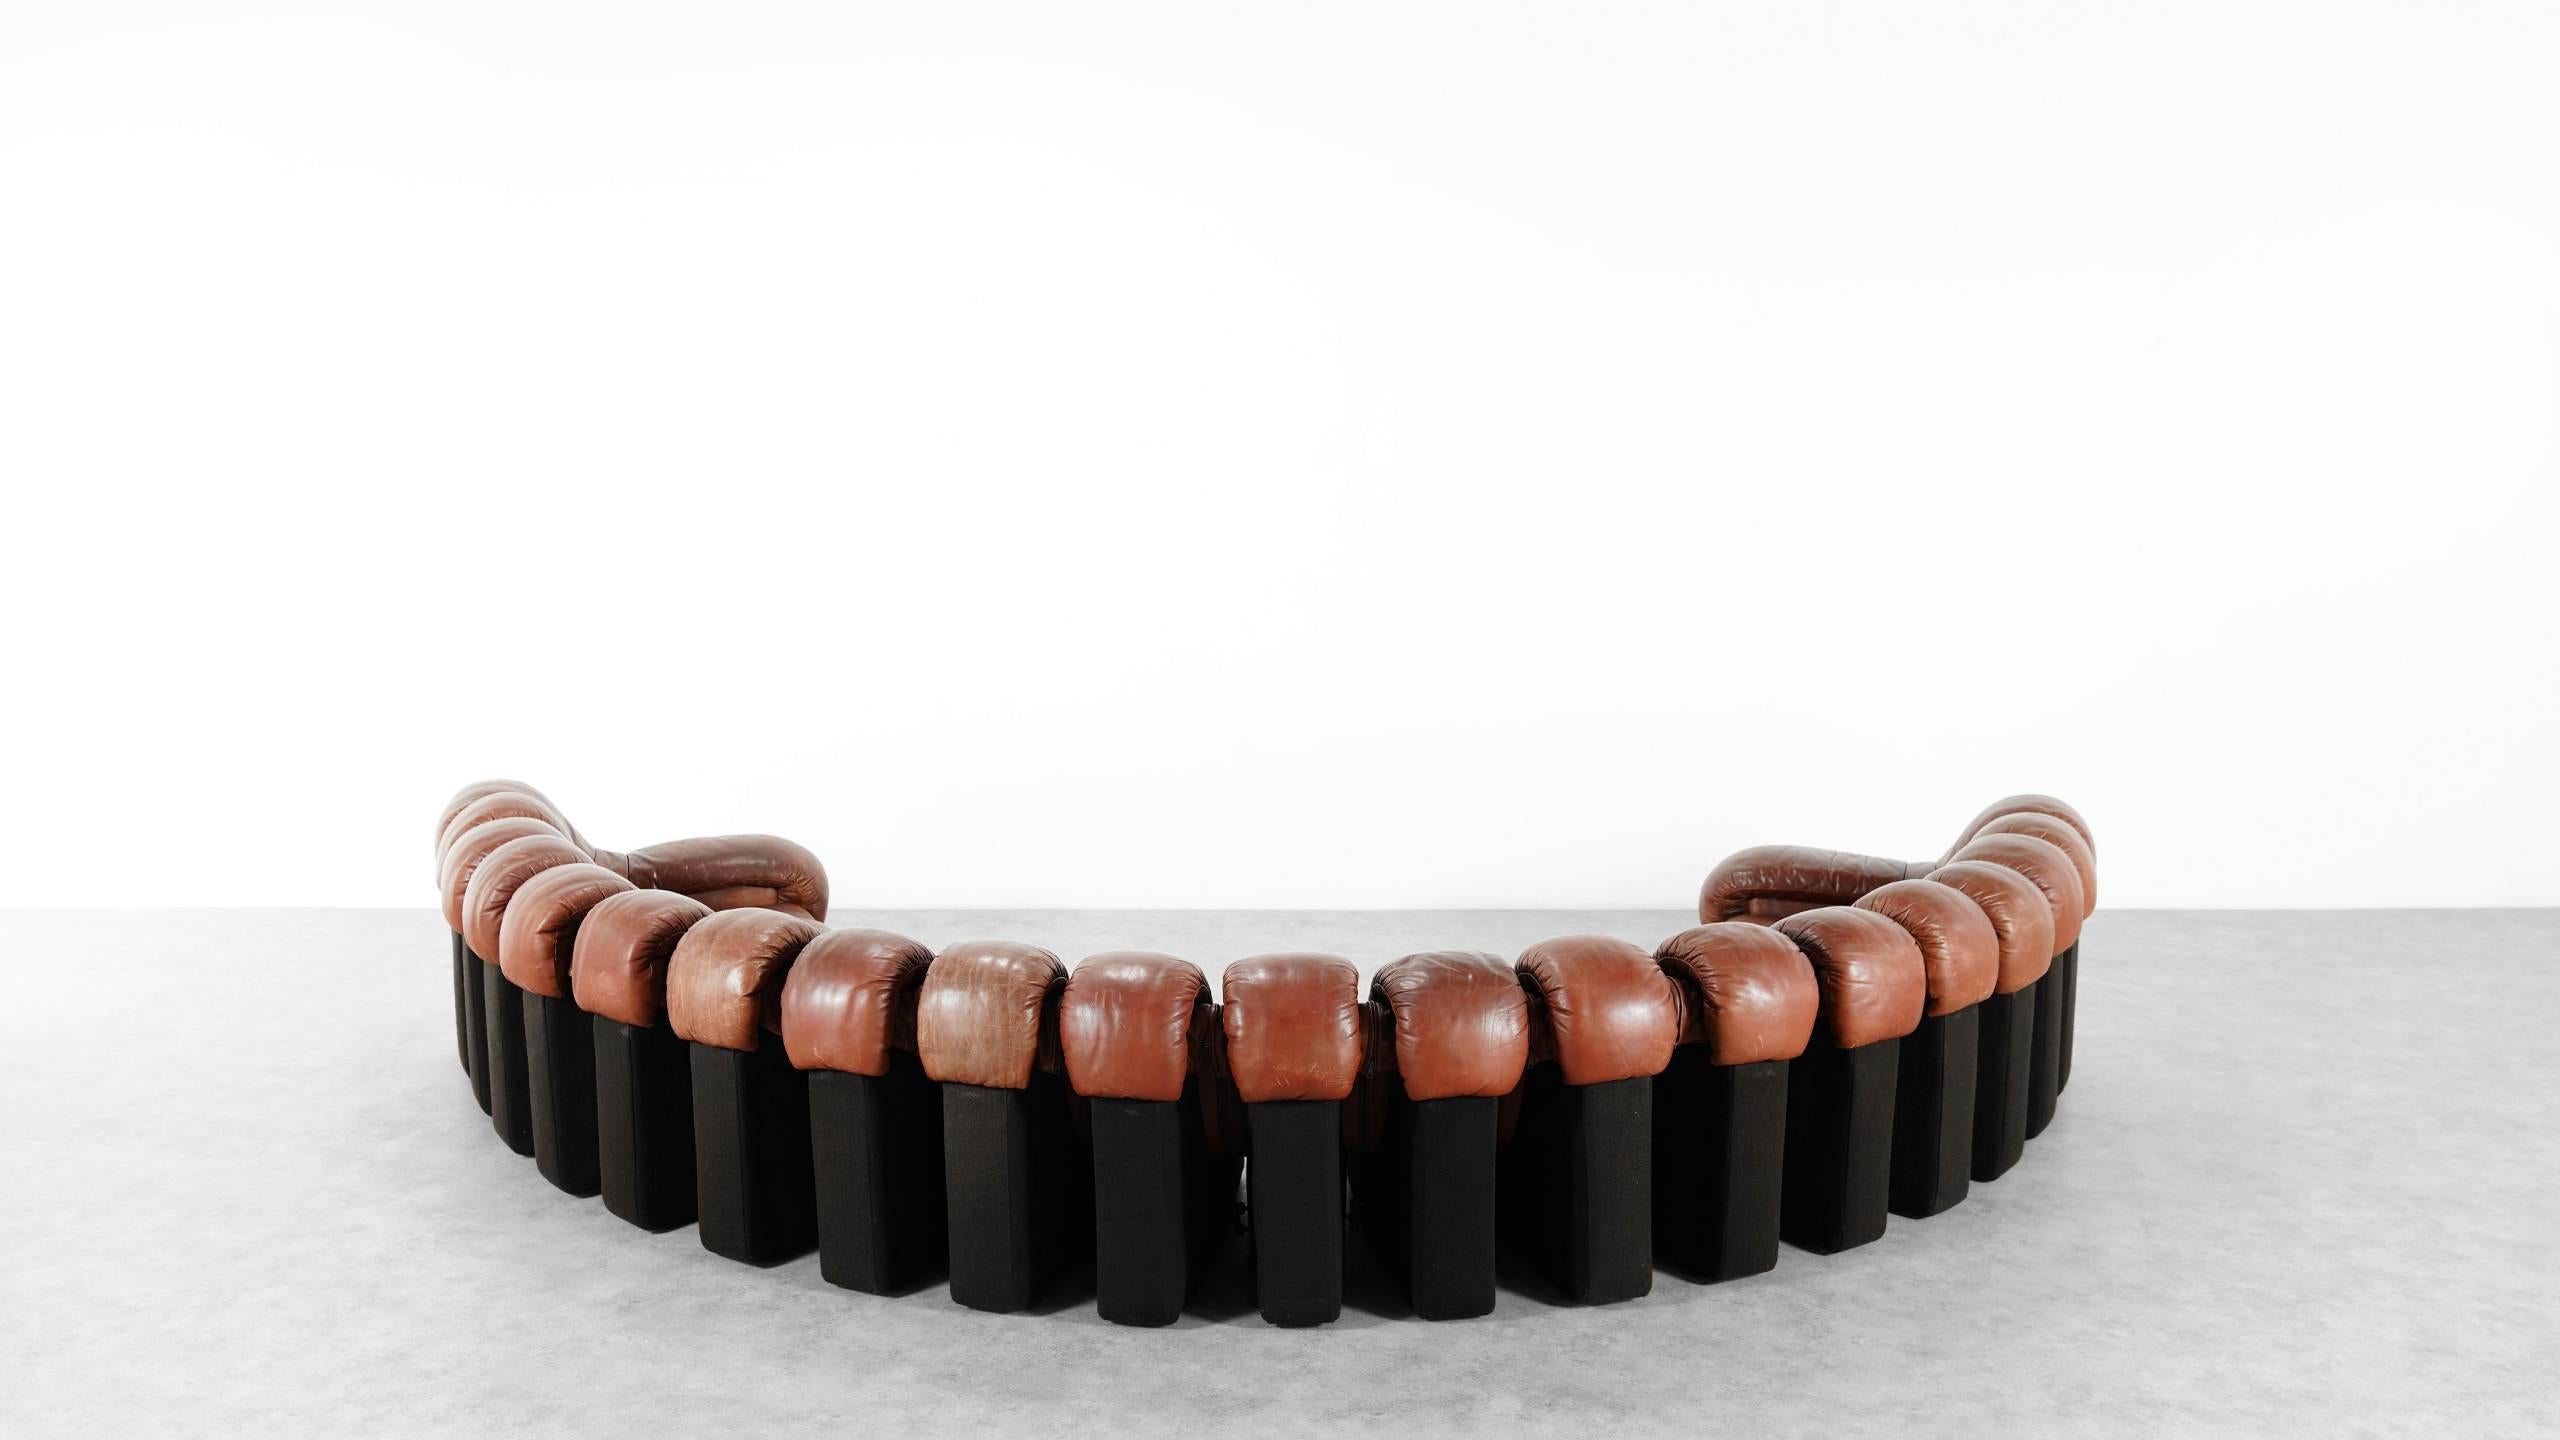 Swiss De Sede Ds 600 Sofa by Ueli Berger and Riva 1972, Chocolate Leather 20 Elements